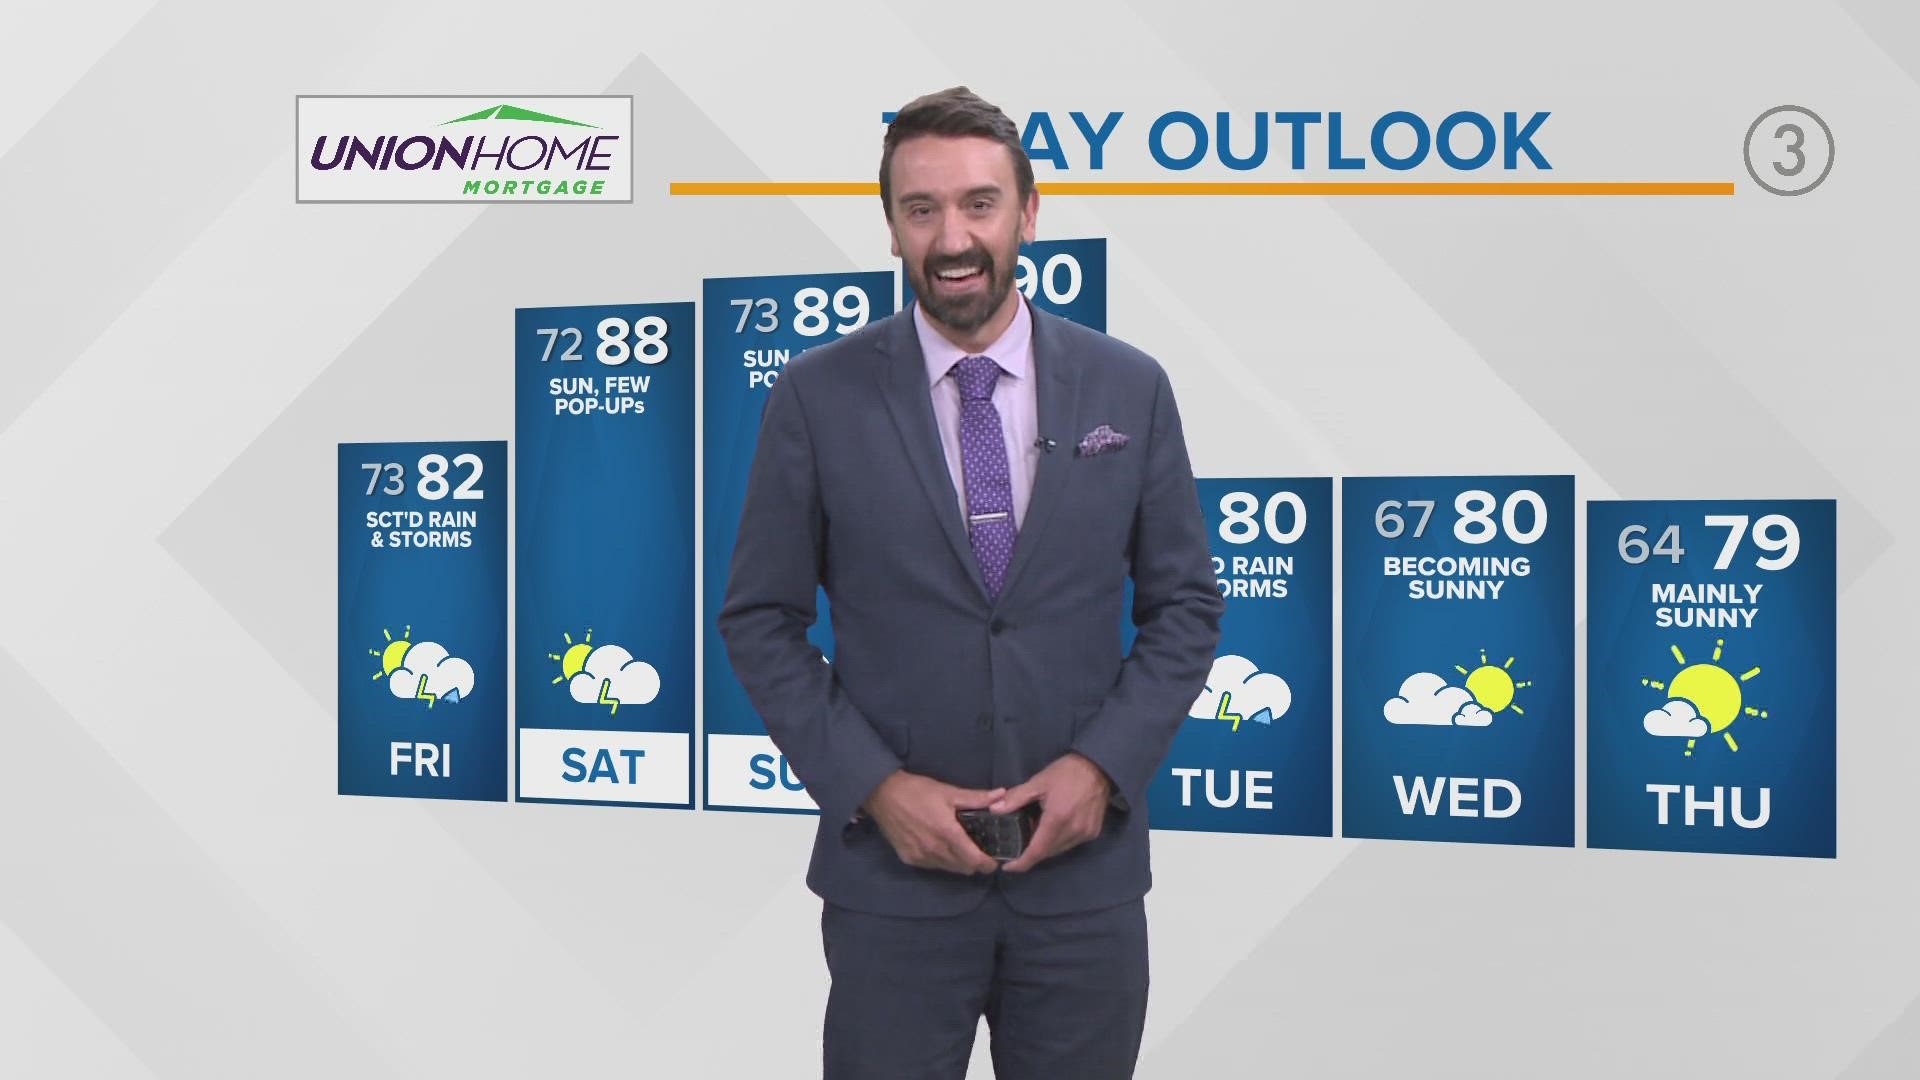 Turn your ACs on, Northeast Ohioans: heat and humidity are high across the region. 3News Meteorologist Matt Wintz has today's weather forecast.